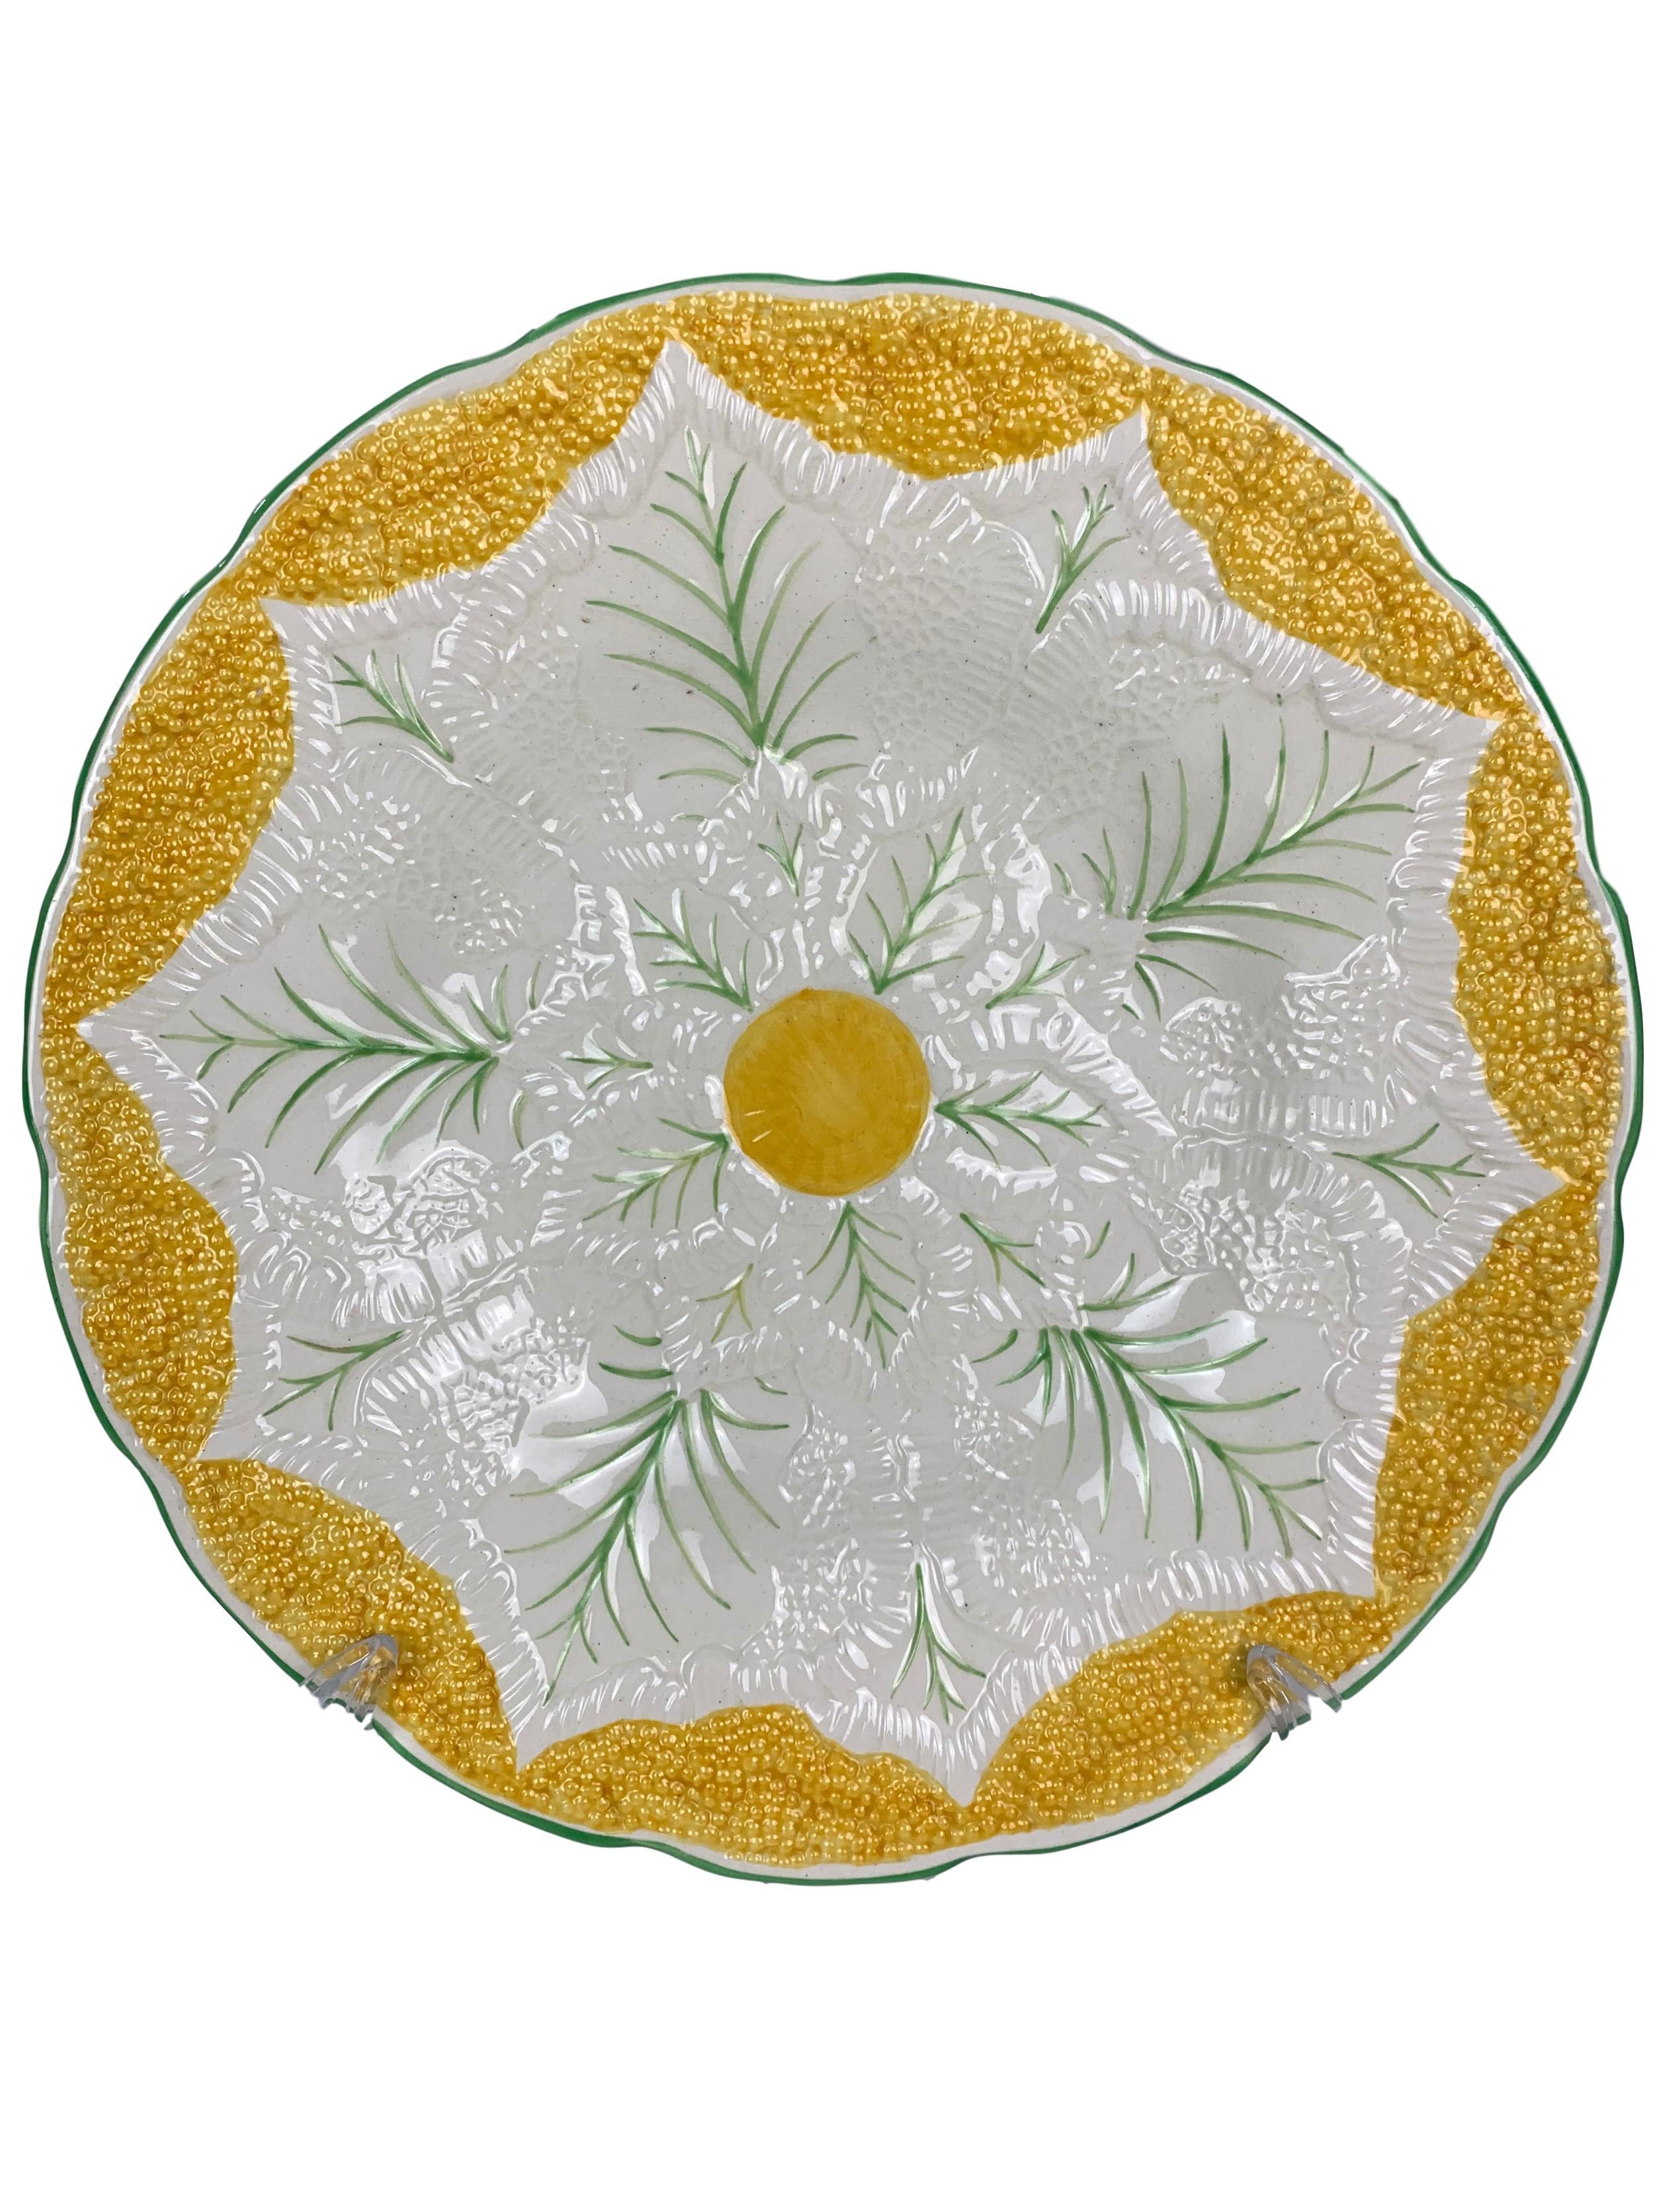 Pair of stunning Majolica plates by Wedgwood in fern pattern and cauliflower texture on outer rim. Stamped on back with 